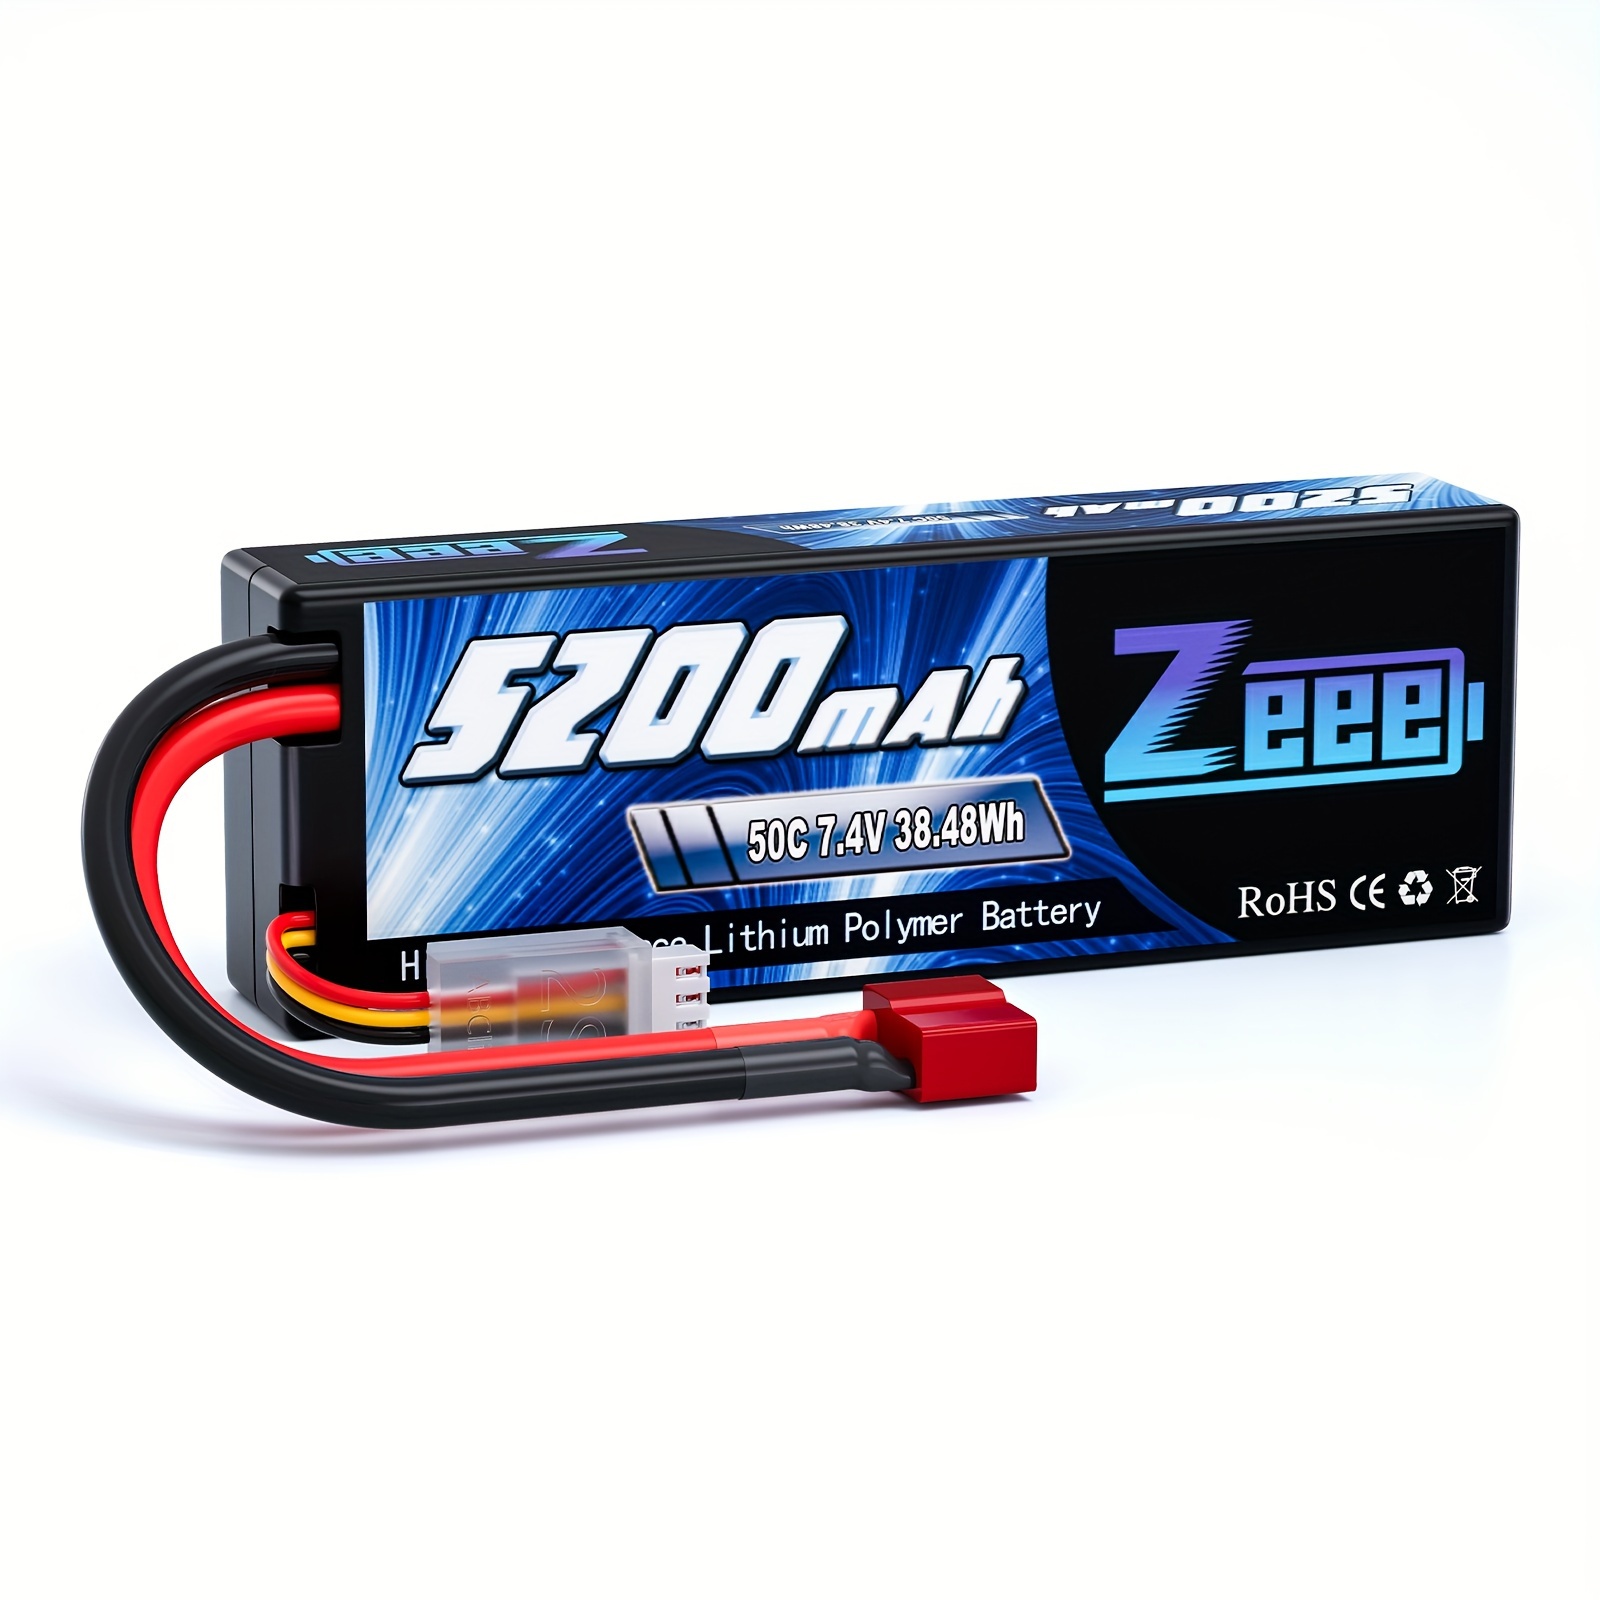 

Zeee 2s 5200mah Lipo Battery 7.4v 50c Hard Case With T Plug For Rc Truck Rc Truggy Rc Heli Airplane Drone Fpv Racing (1 Pack)